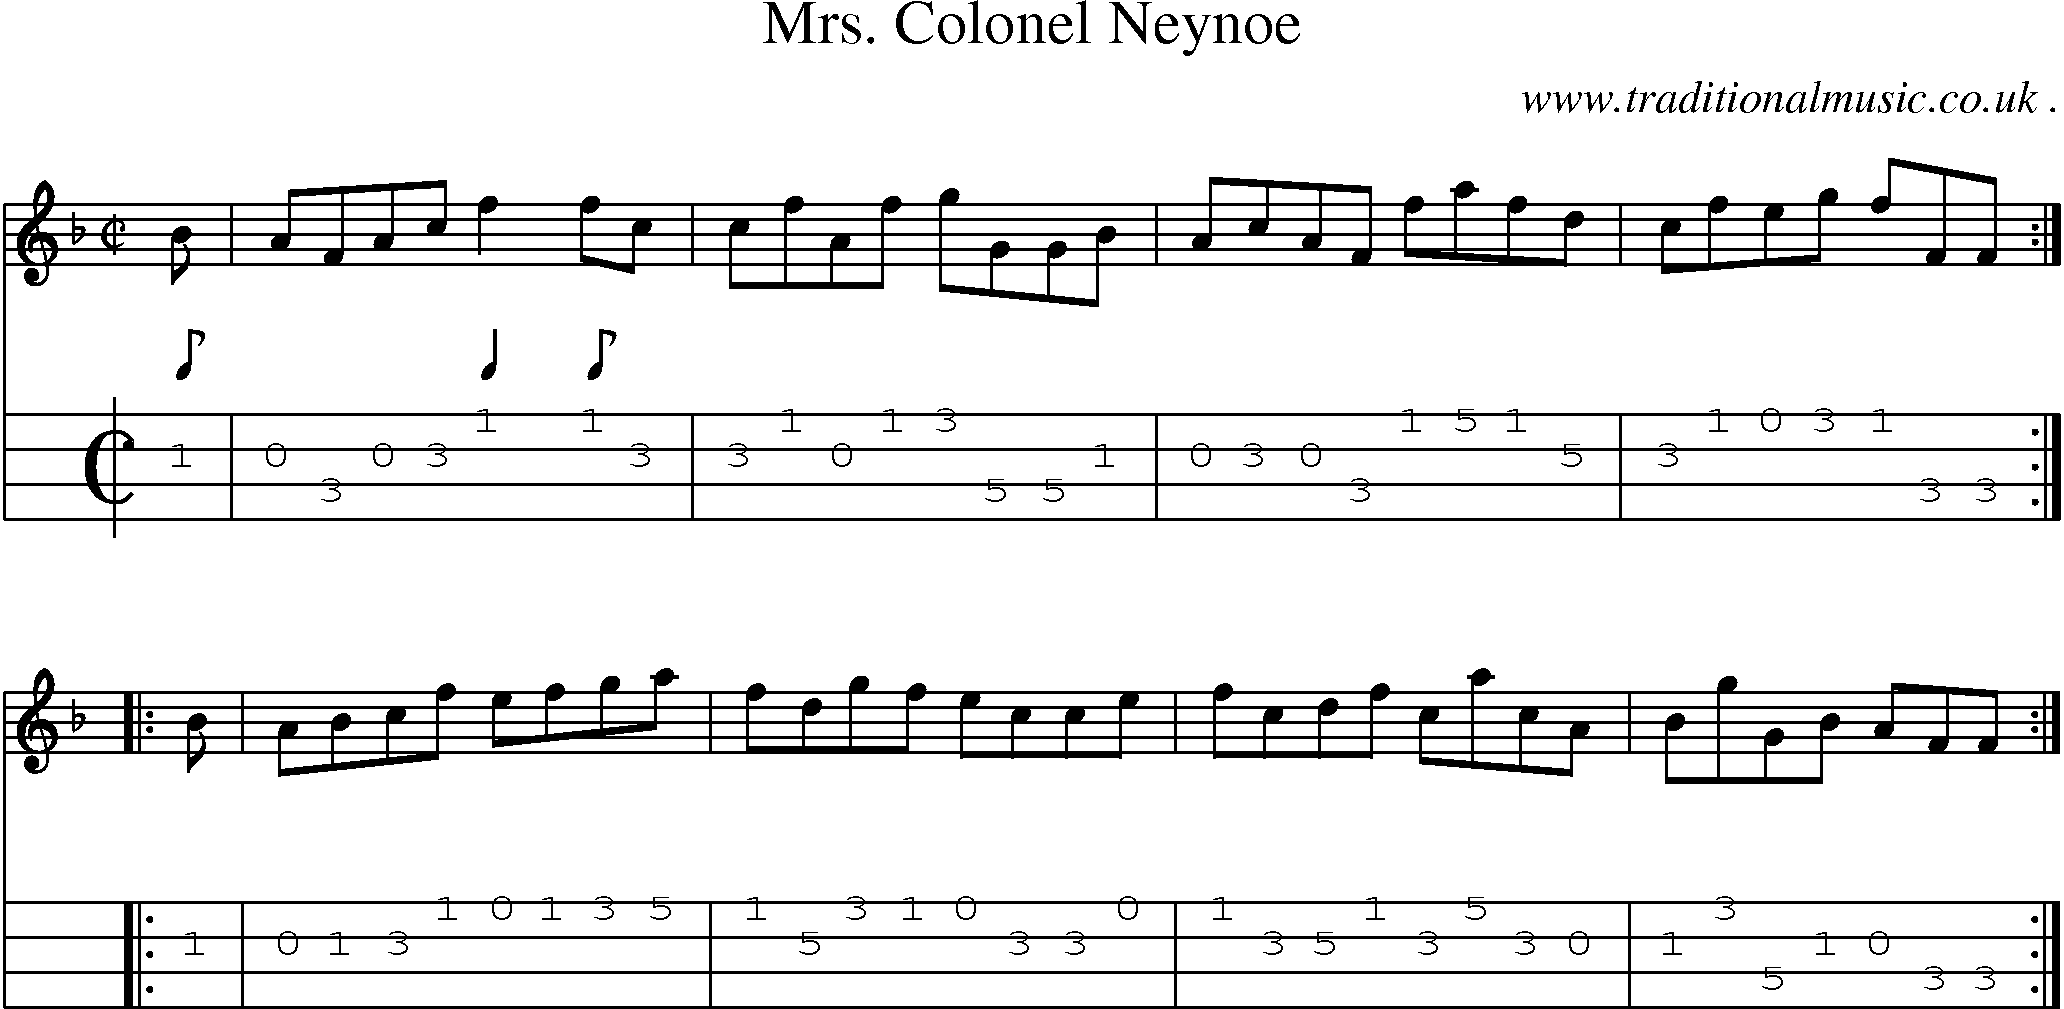 Sheet-music  score, Chords and Mandolin Tabs for Mrs Colonel Neynoe